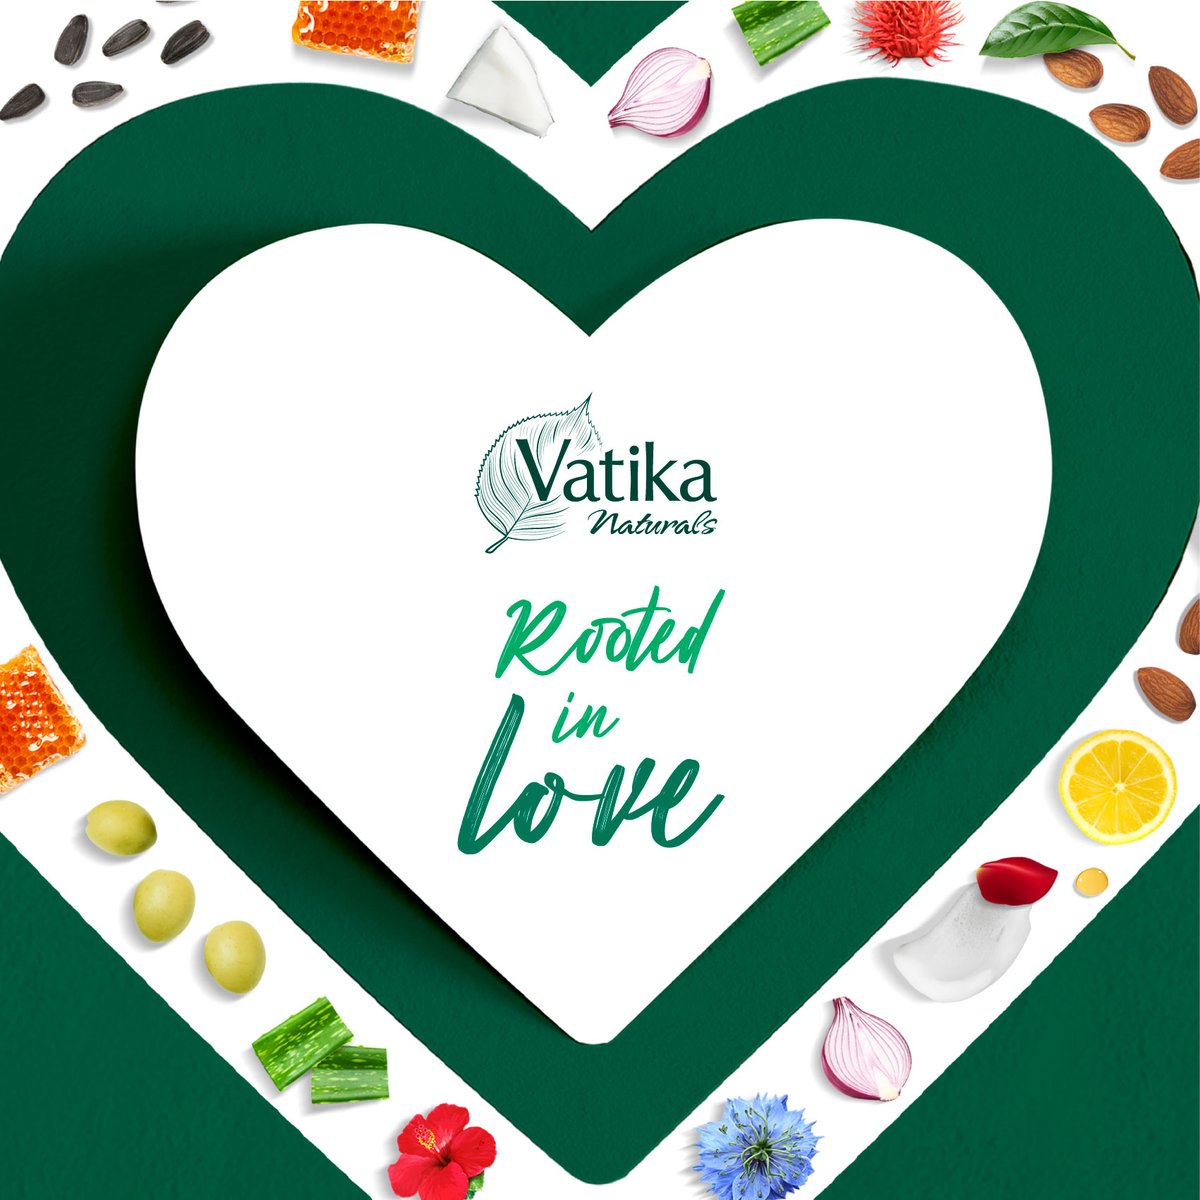 This year, we are honoring our love-infused products that use natural ingredients to revitalize your hair. We have chosen green, the color of growth and rejuvenation, to symbolize the benefits of our ingredients! #VatikaUk #valentinesday #naturalproduct #naturalhair